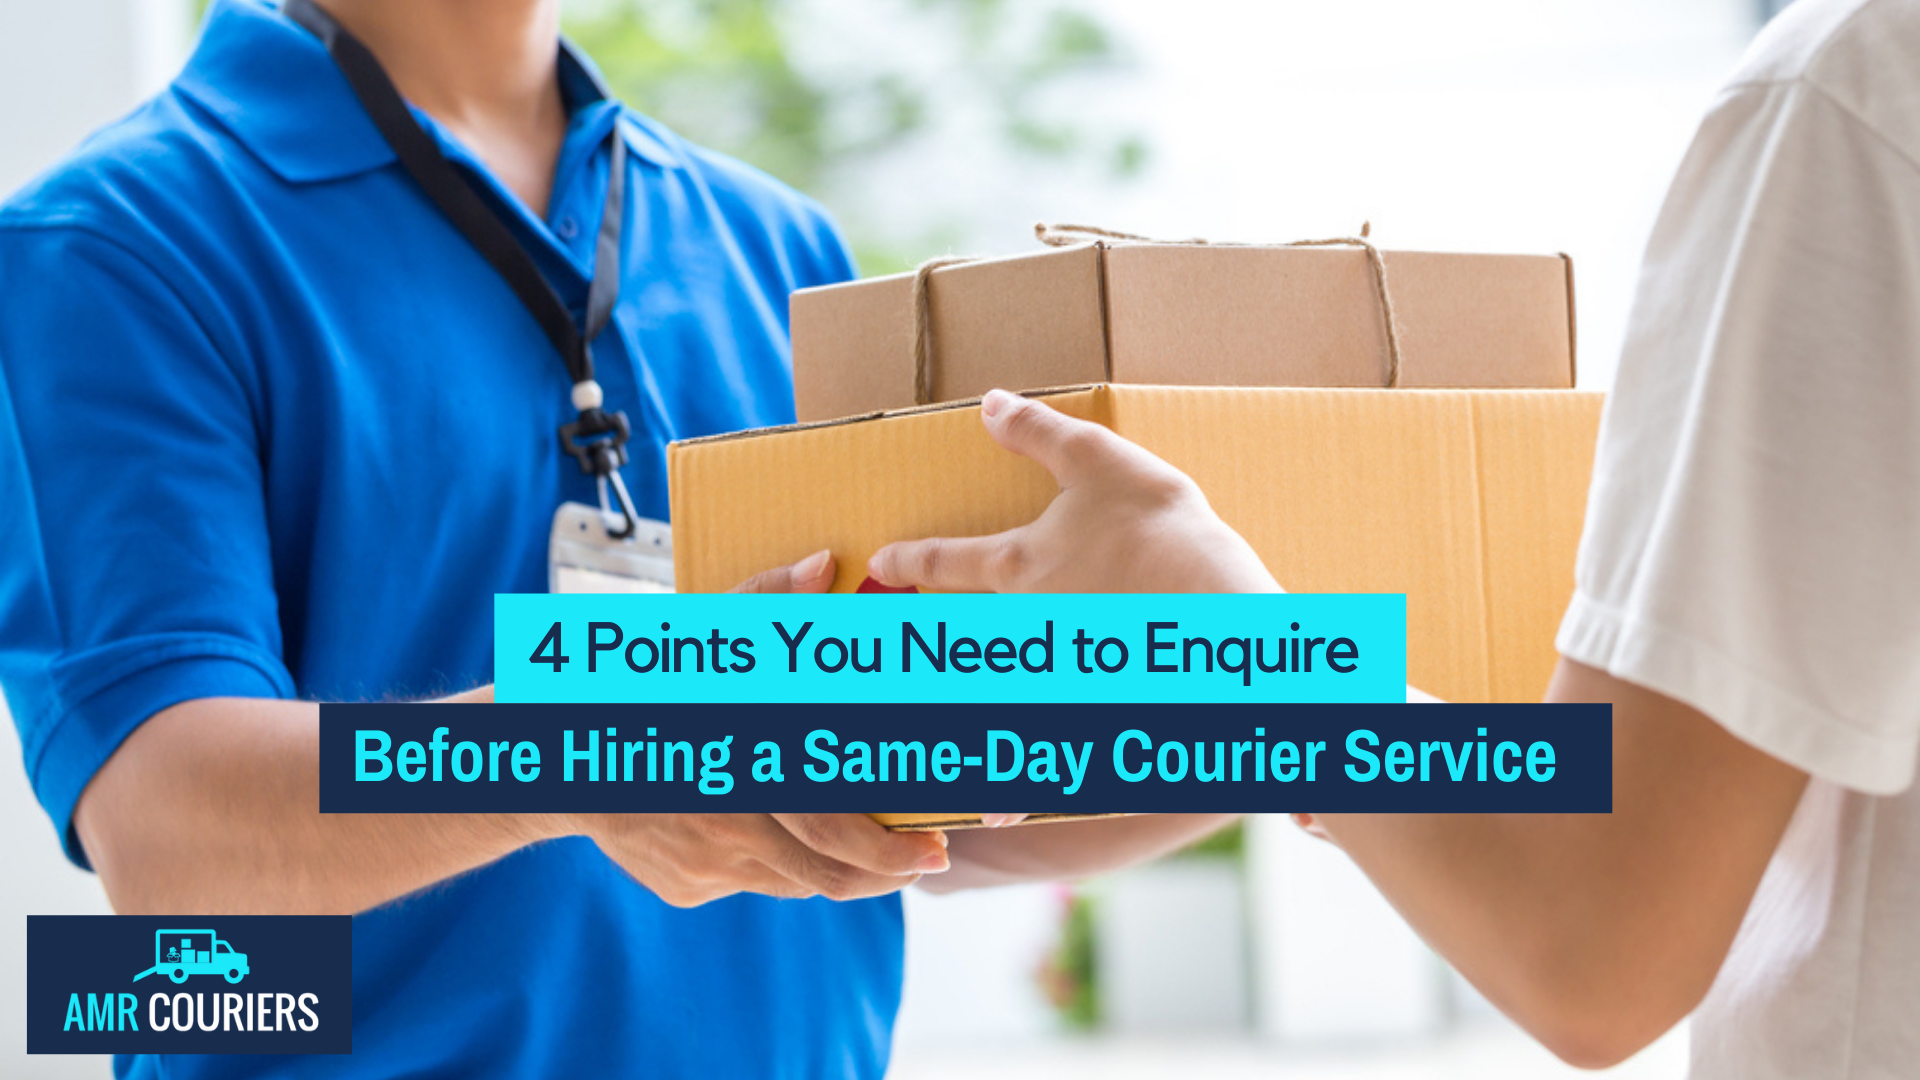 4 Points You Need to Enquire Before Hiring a Same-Day Courier Service